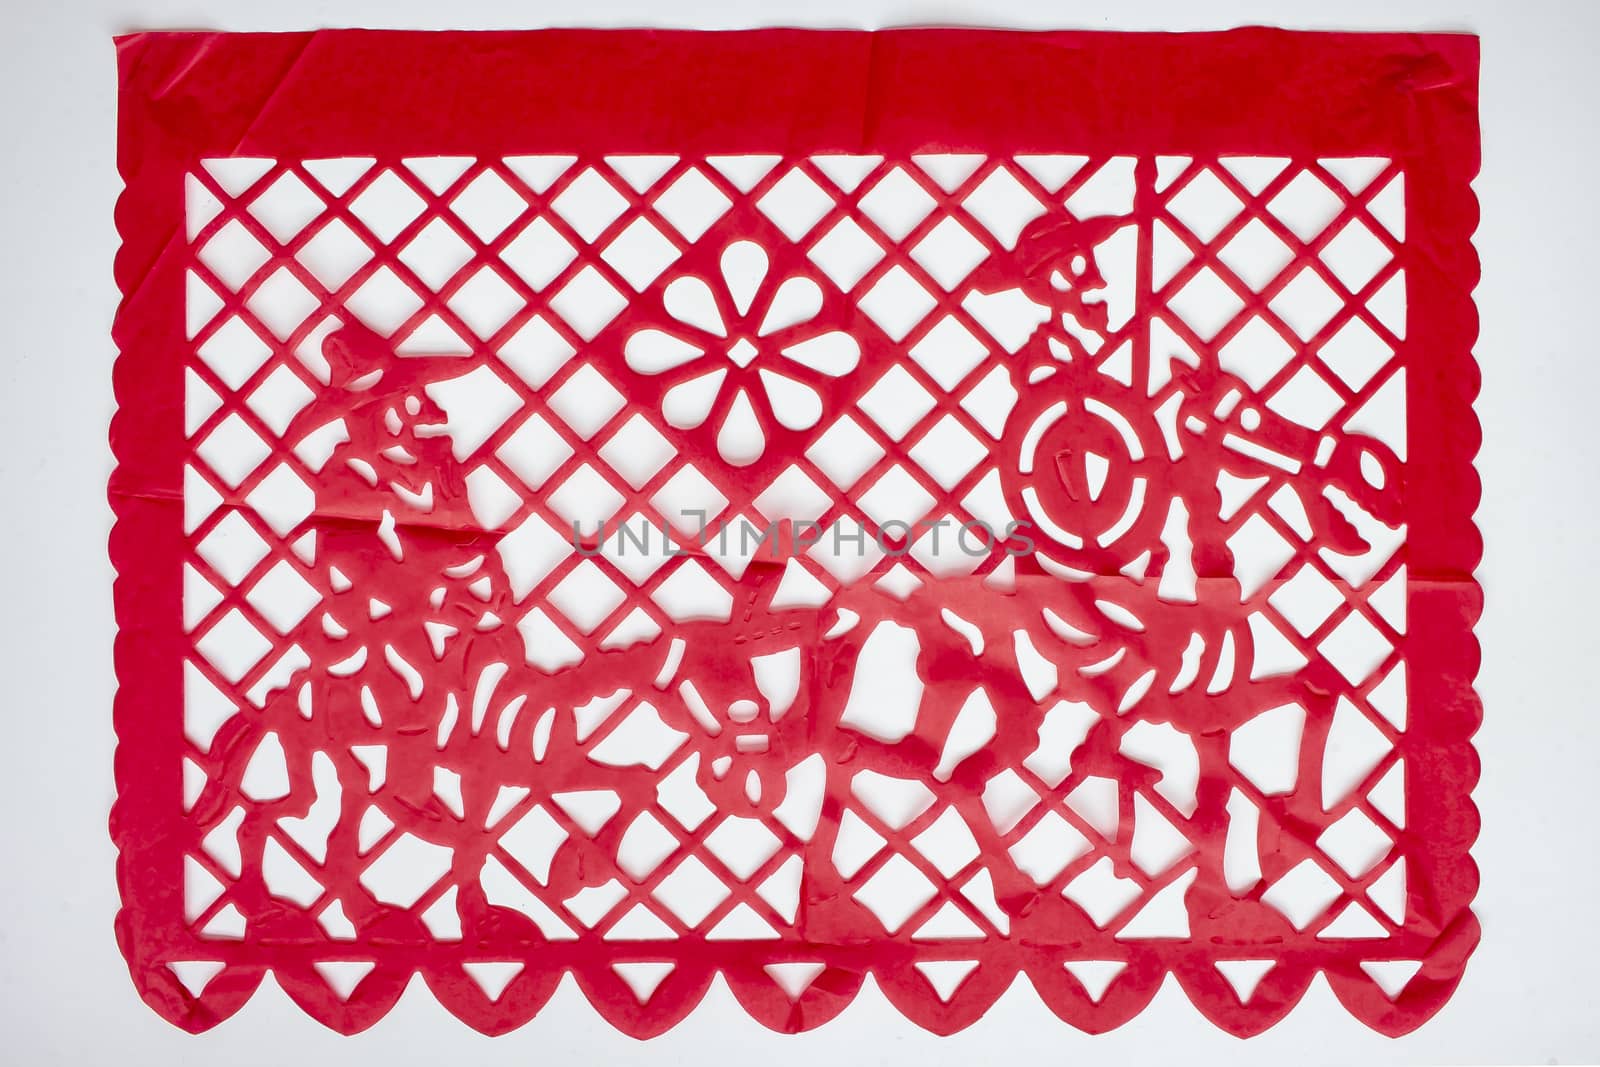 Day of the Dead, Papel Picado. Red Real traditional Mexican paper cutting flag. Isolated on white background. by oasisamuel